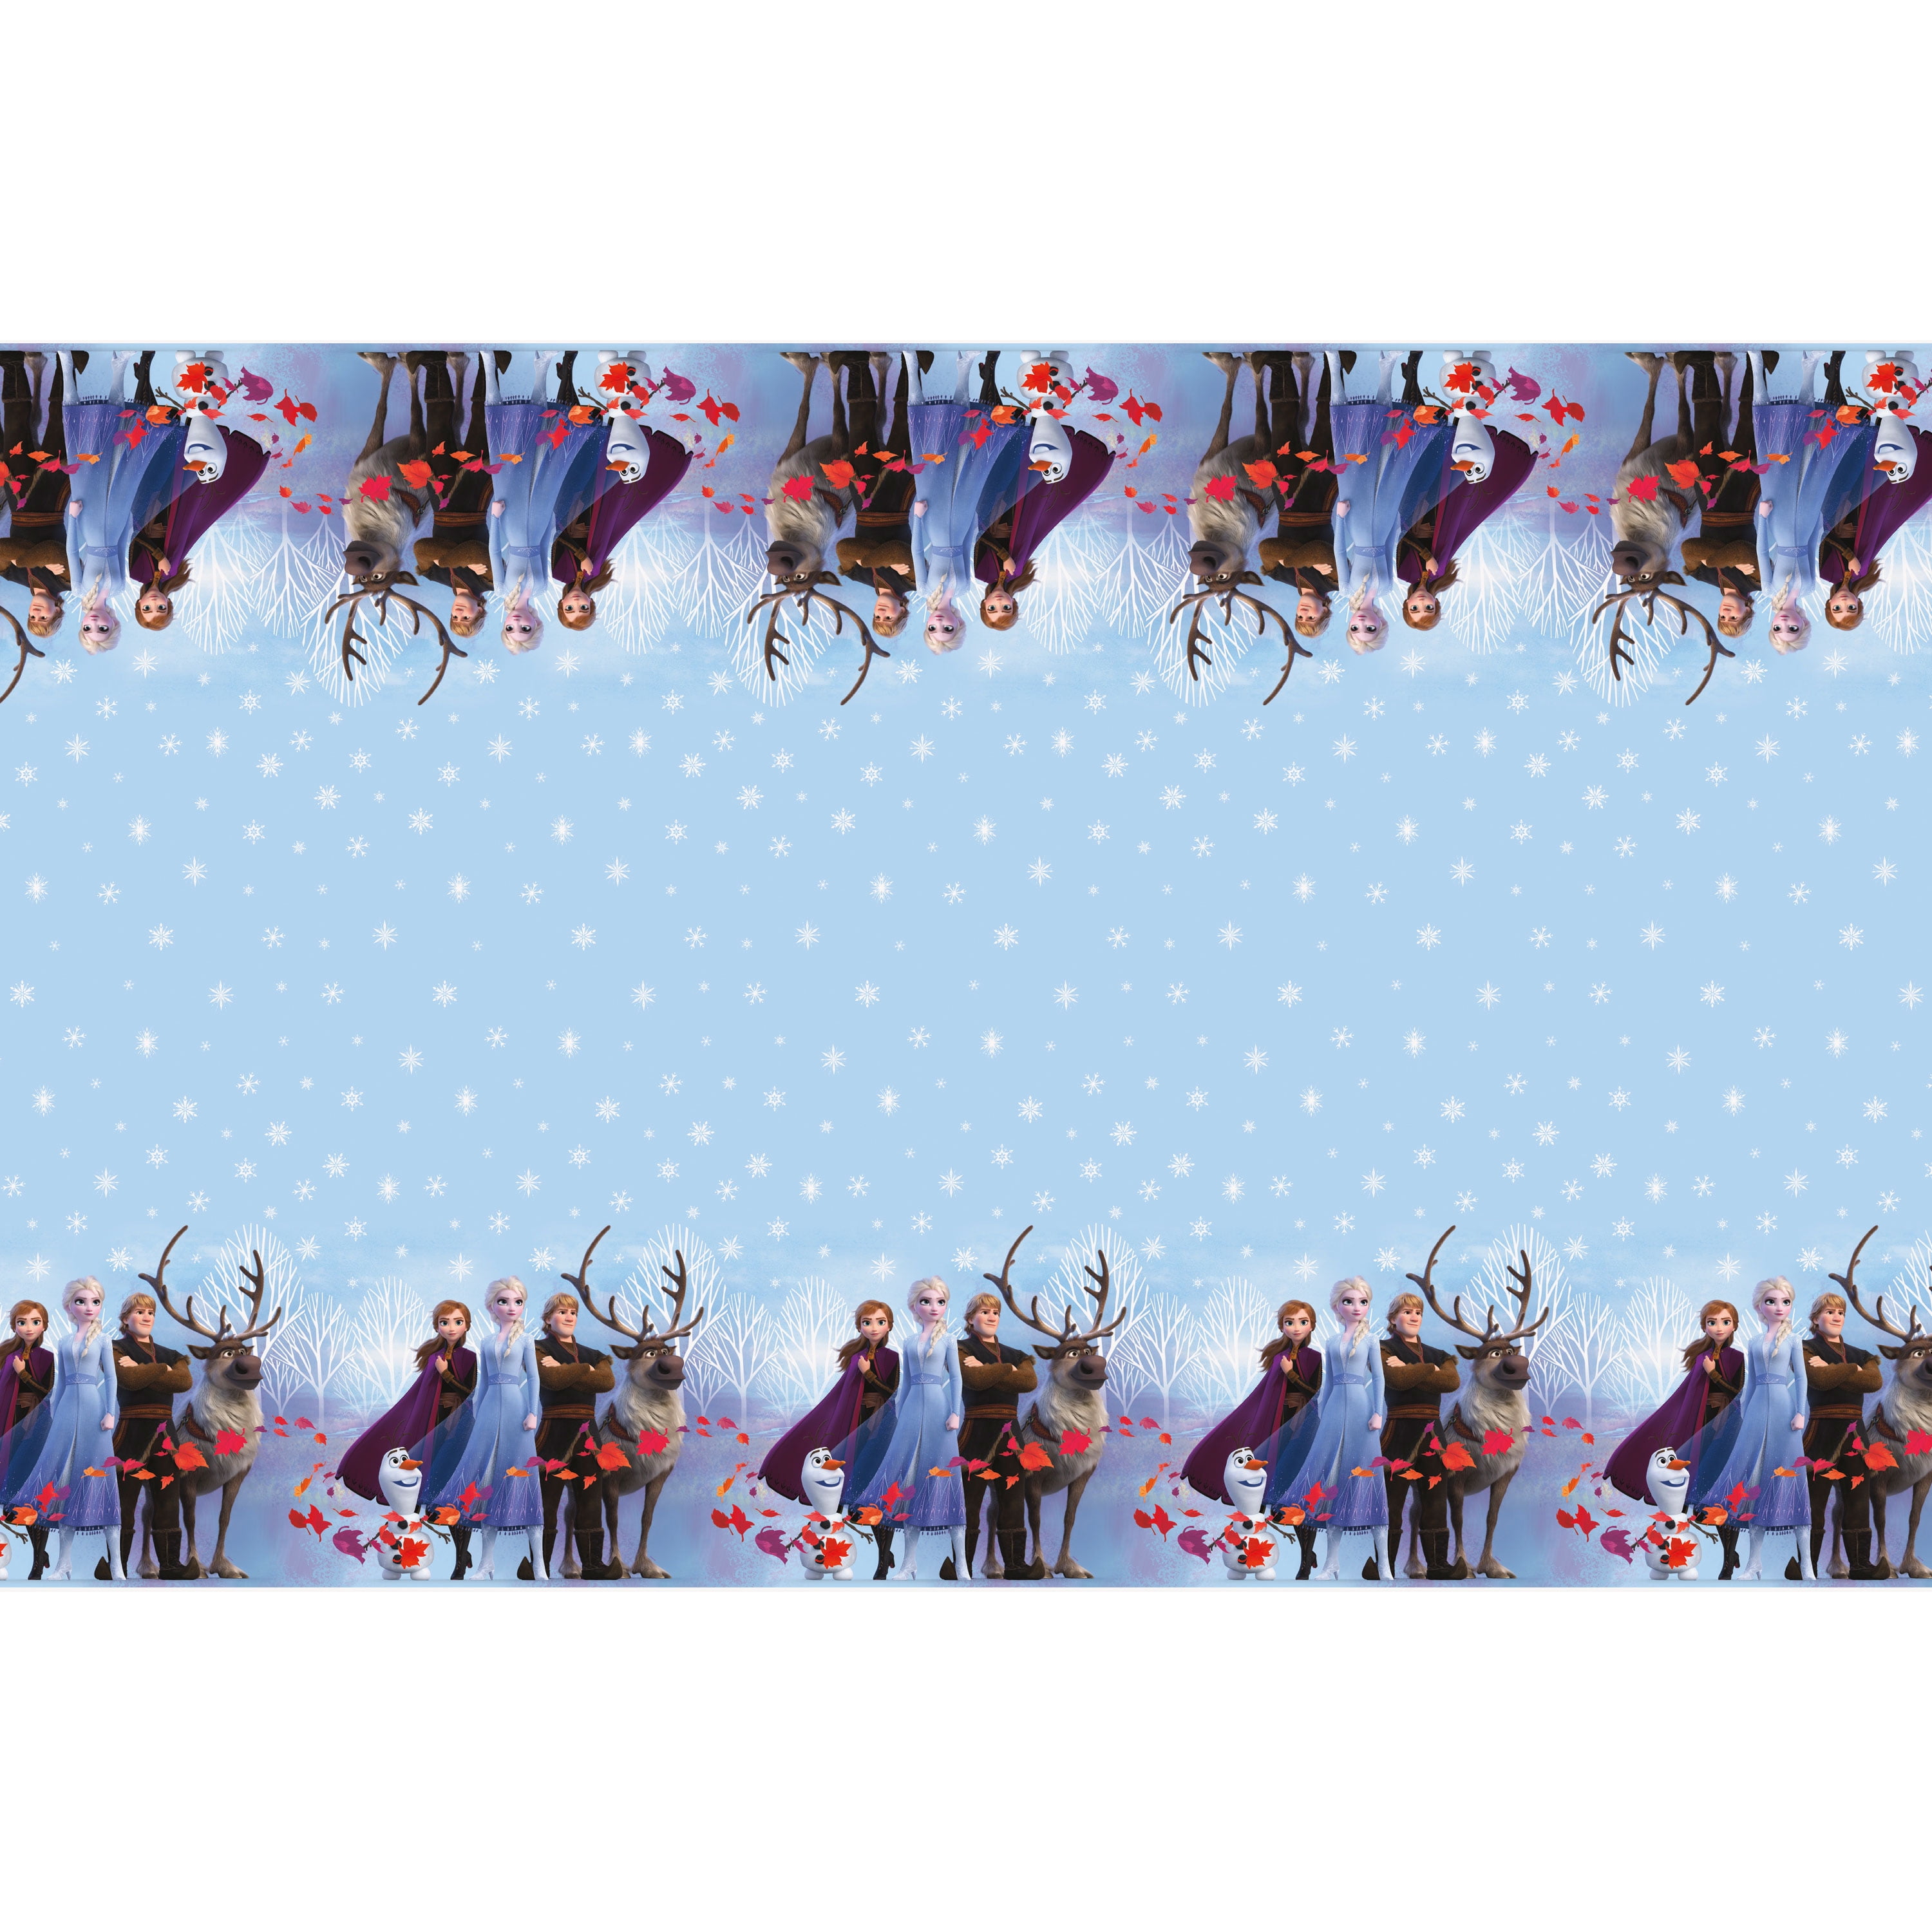 Snowflake tablecover plasic Frozen Party Christmas Winter grotto 54 x 84 inch